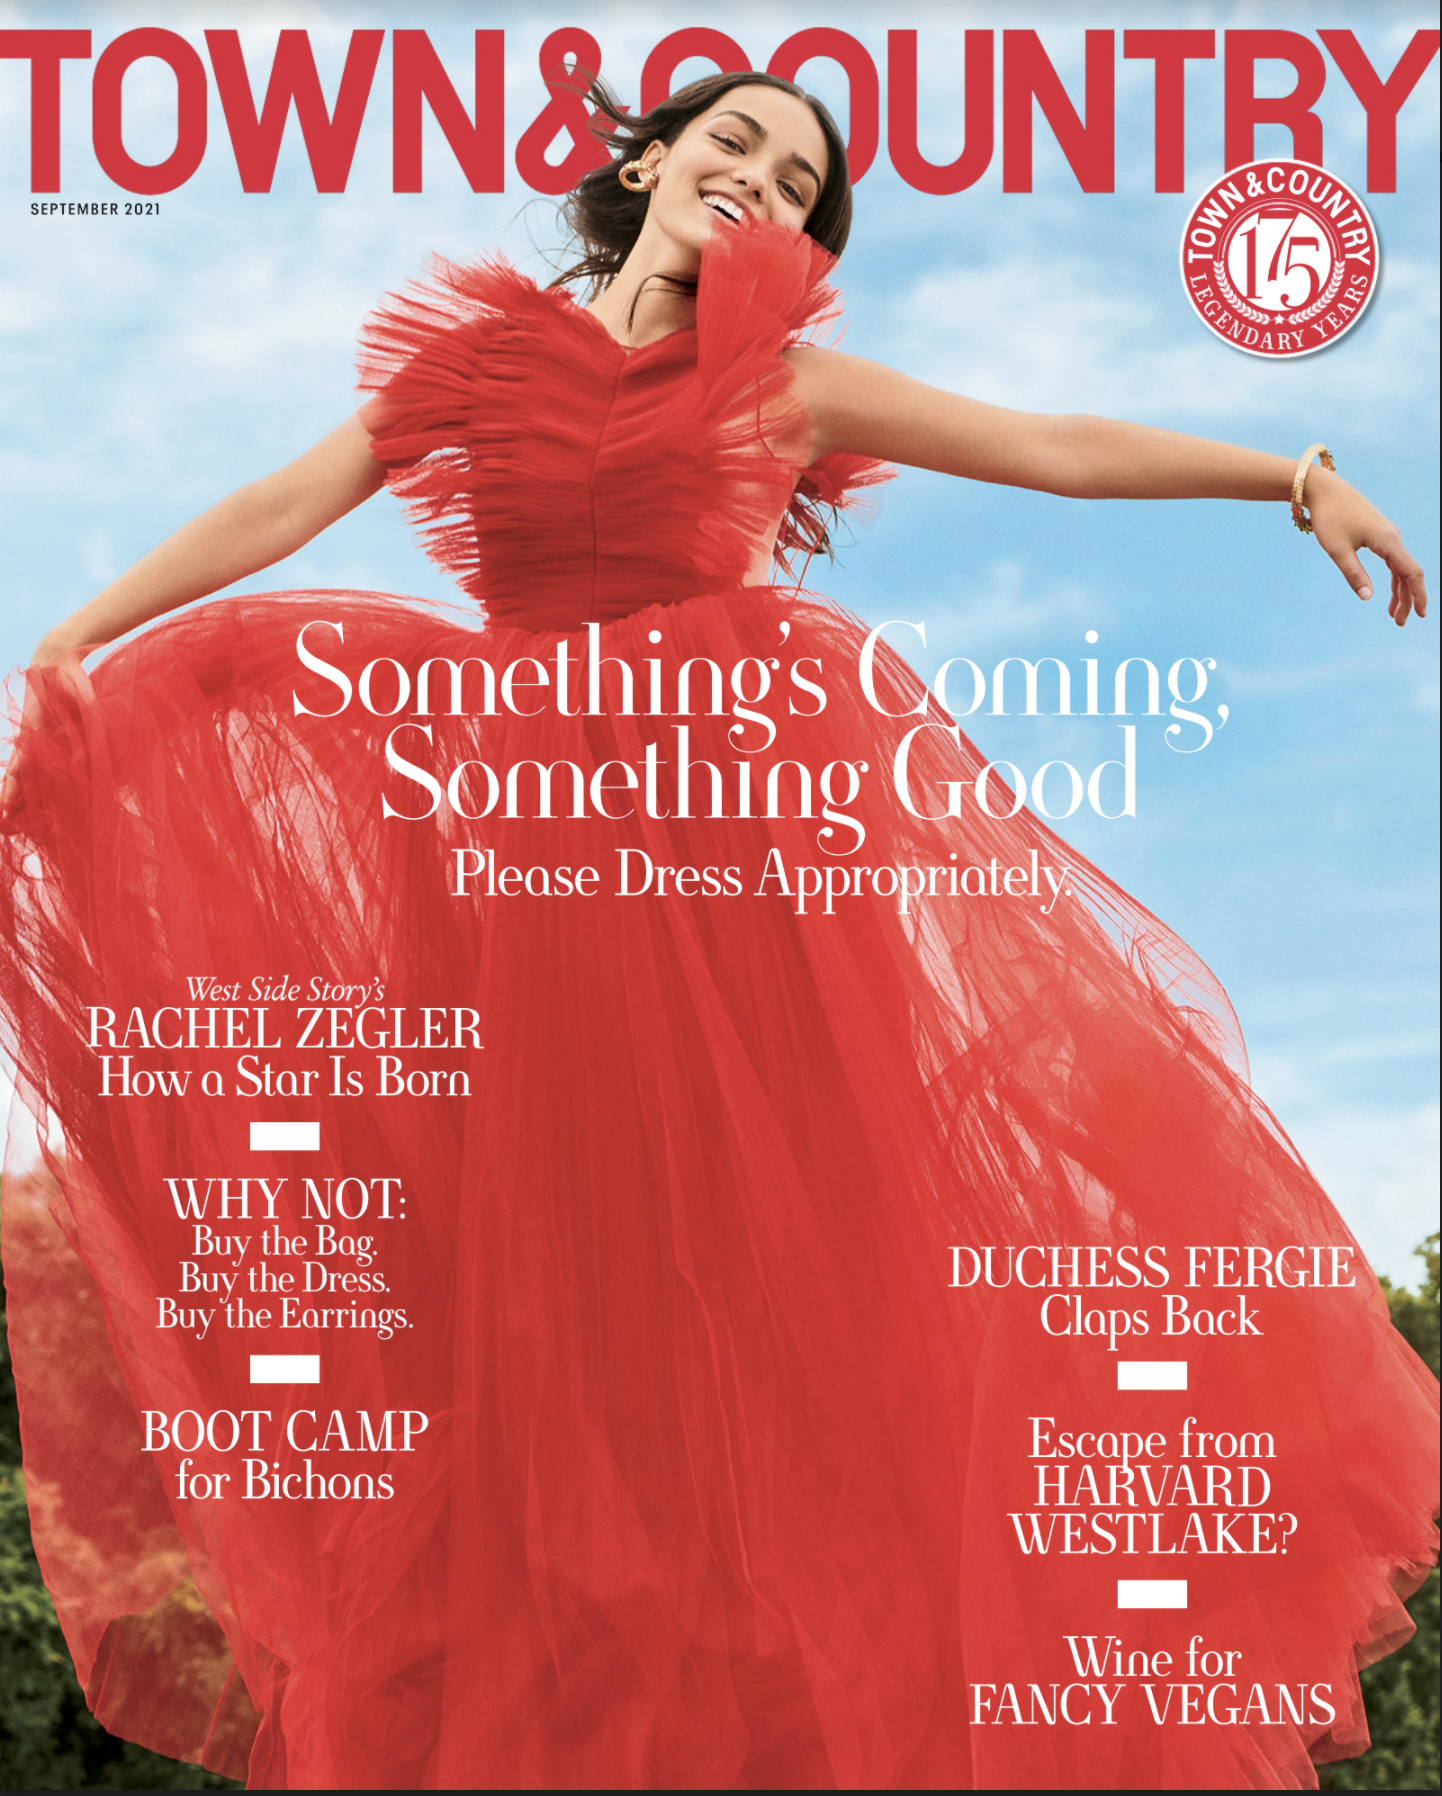 Town and Country Magazine - September Edition